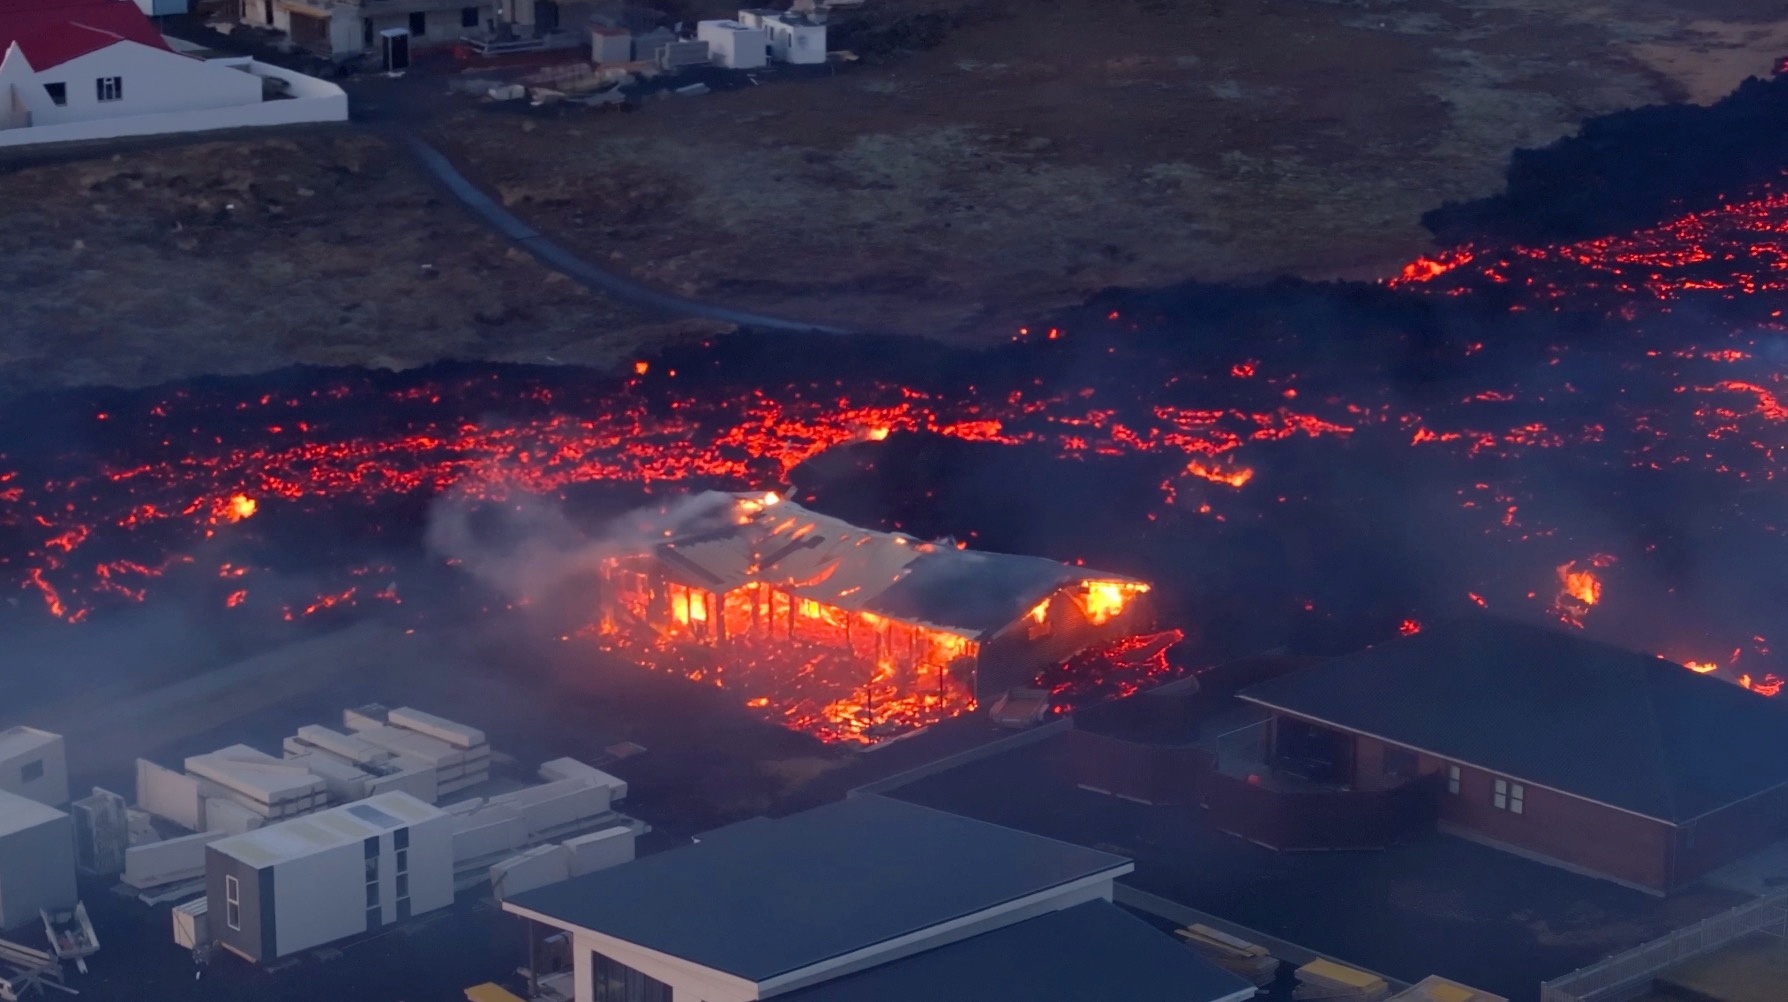 Lava flows from a volcano as houses burn in Grindavik, Iceland, January 14, 2024, in this screen grab obtained from a social media video. Bjorn Steinbekk/@bsteinbekk via Instagram/via REUTERS